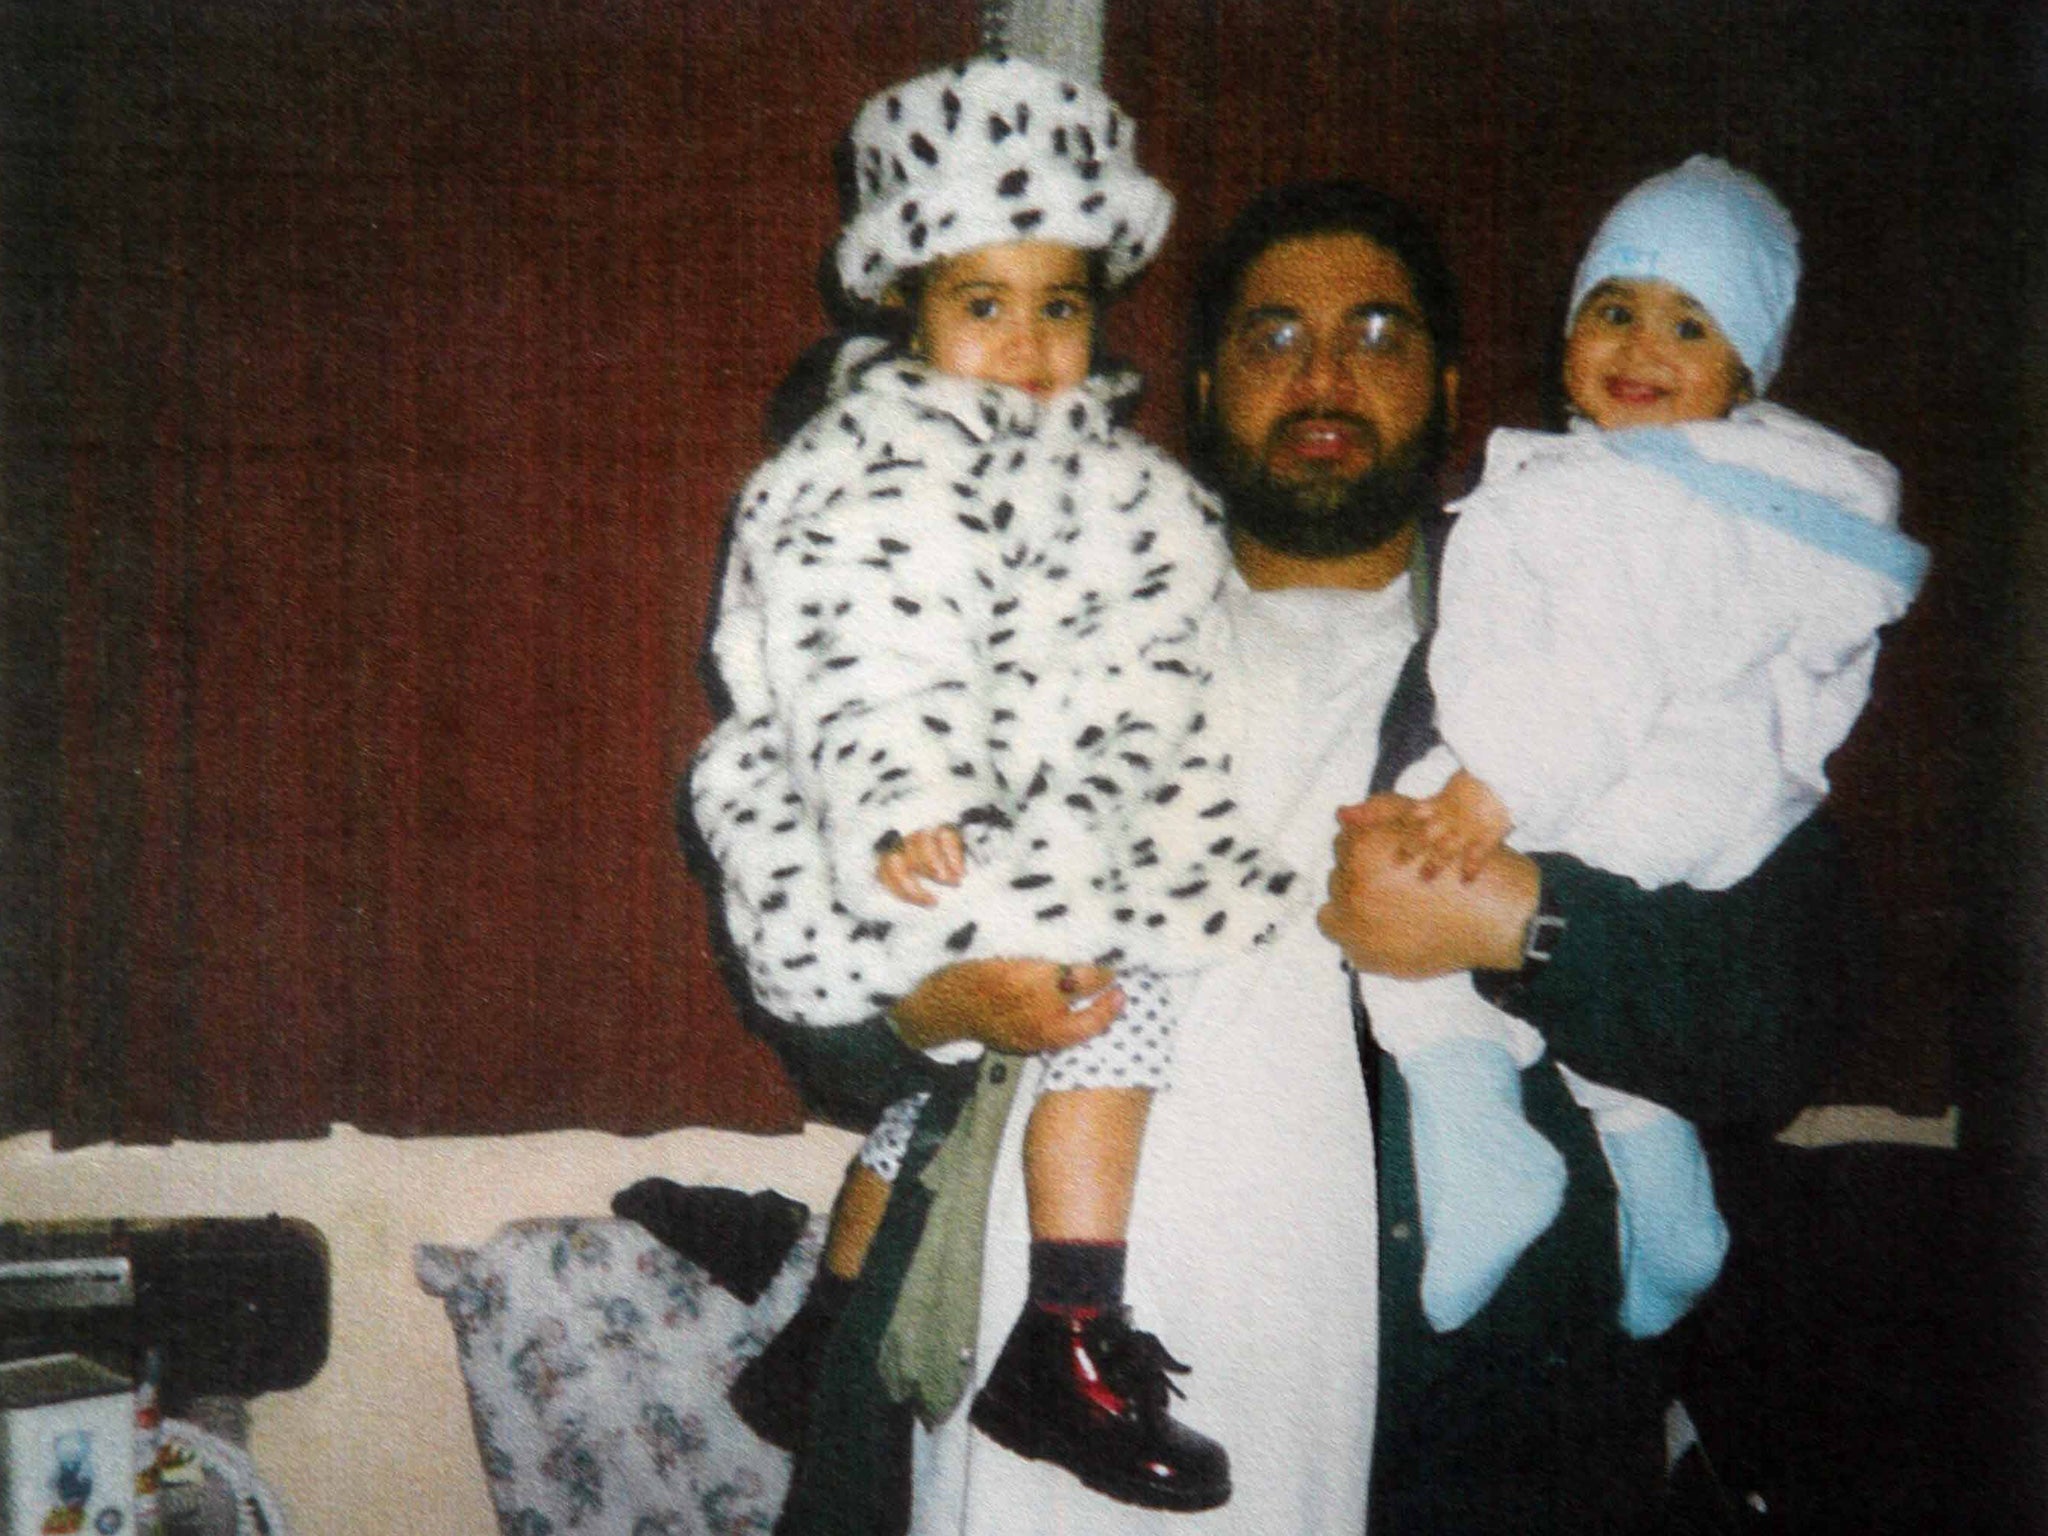 Shaker Aamer with two of his four children. He has residence rights in the UK